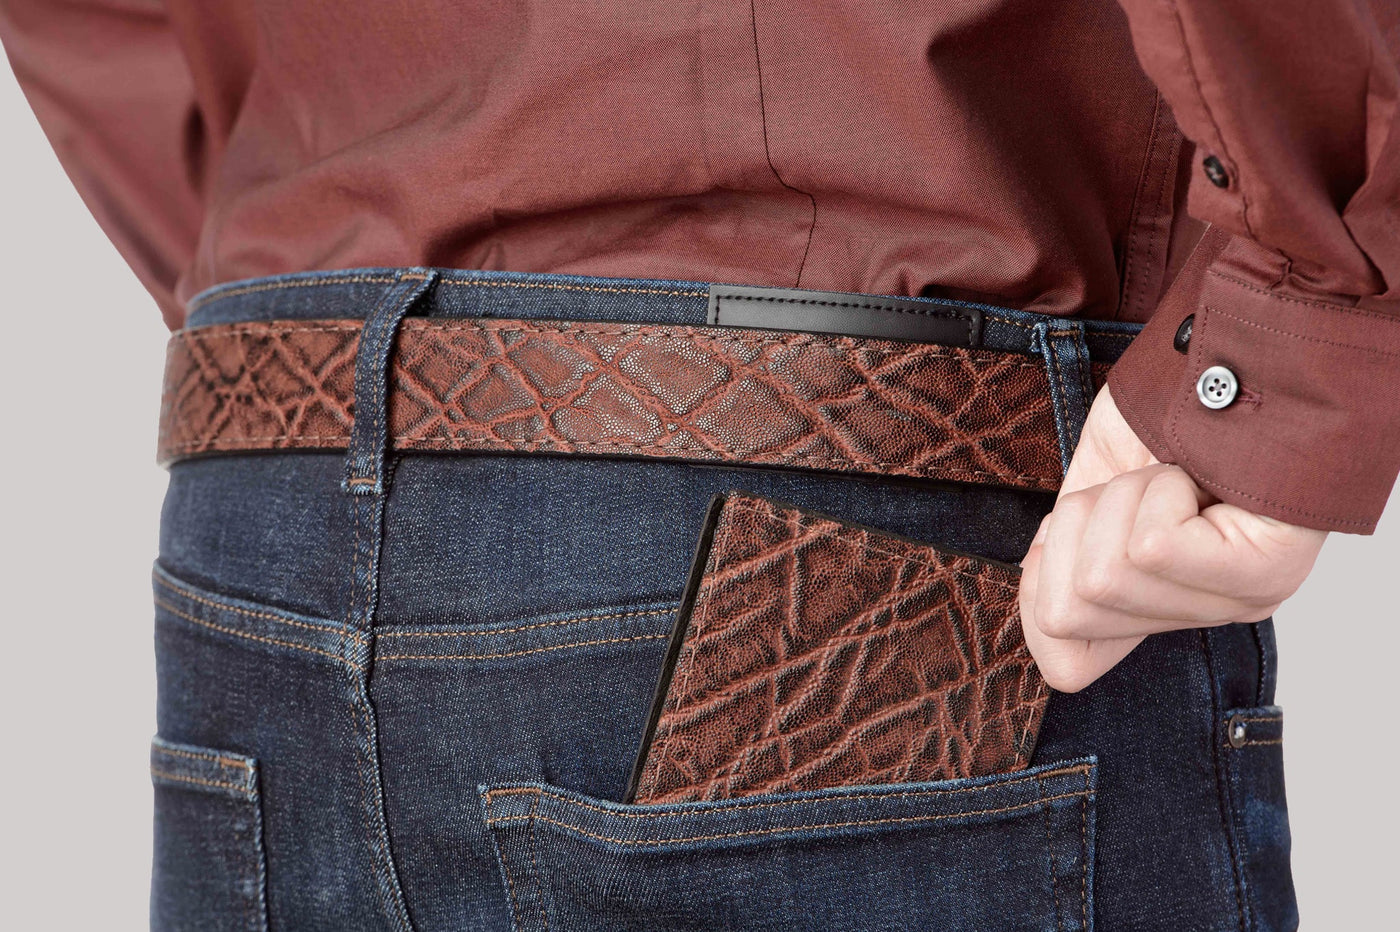 The Perfect Leather Belt Size - MAJR Leather Goods